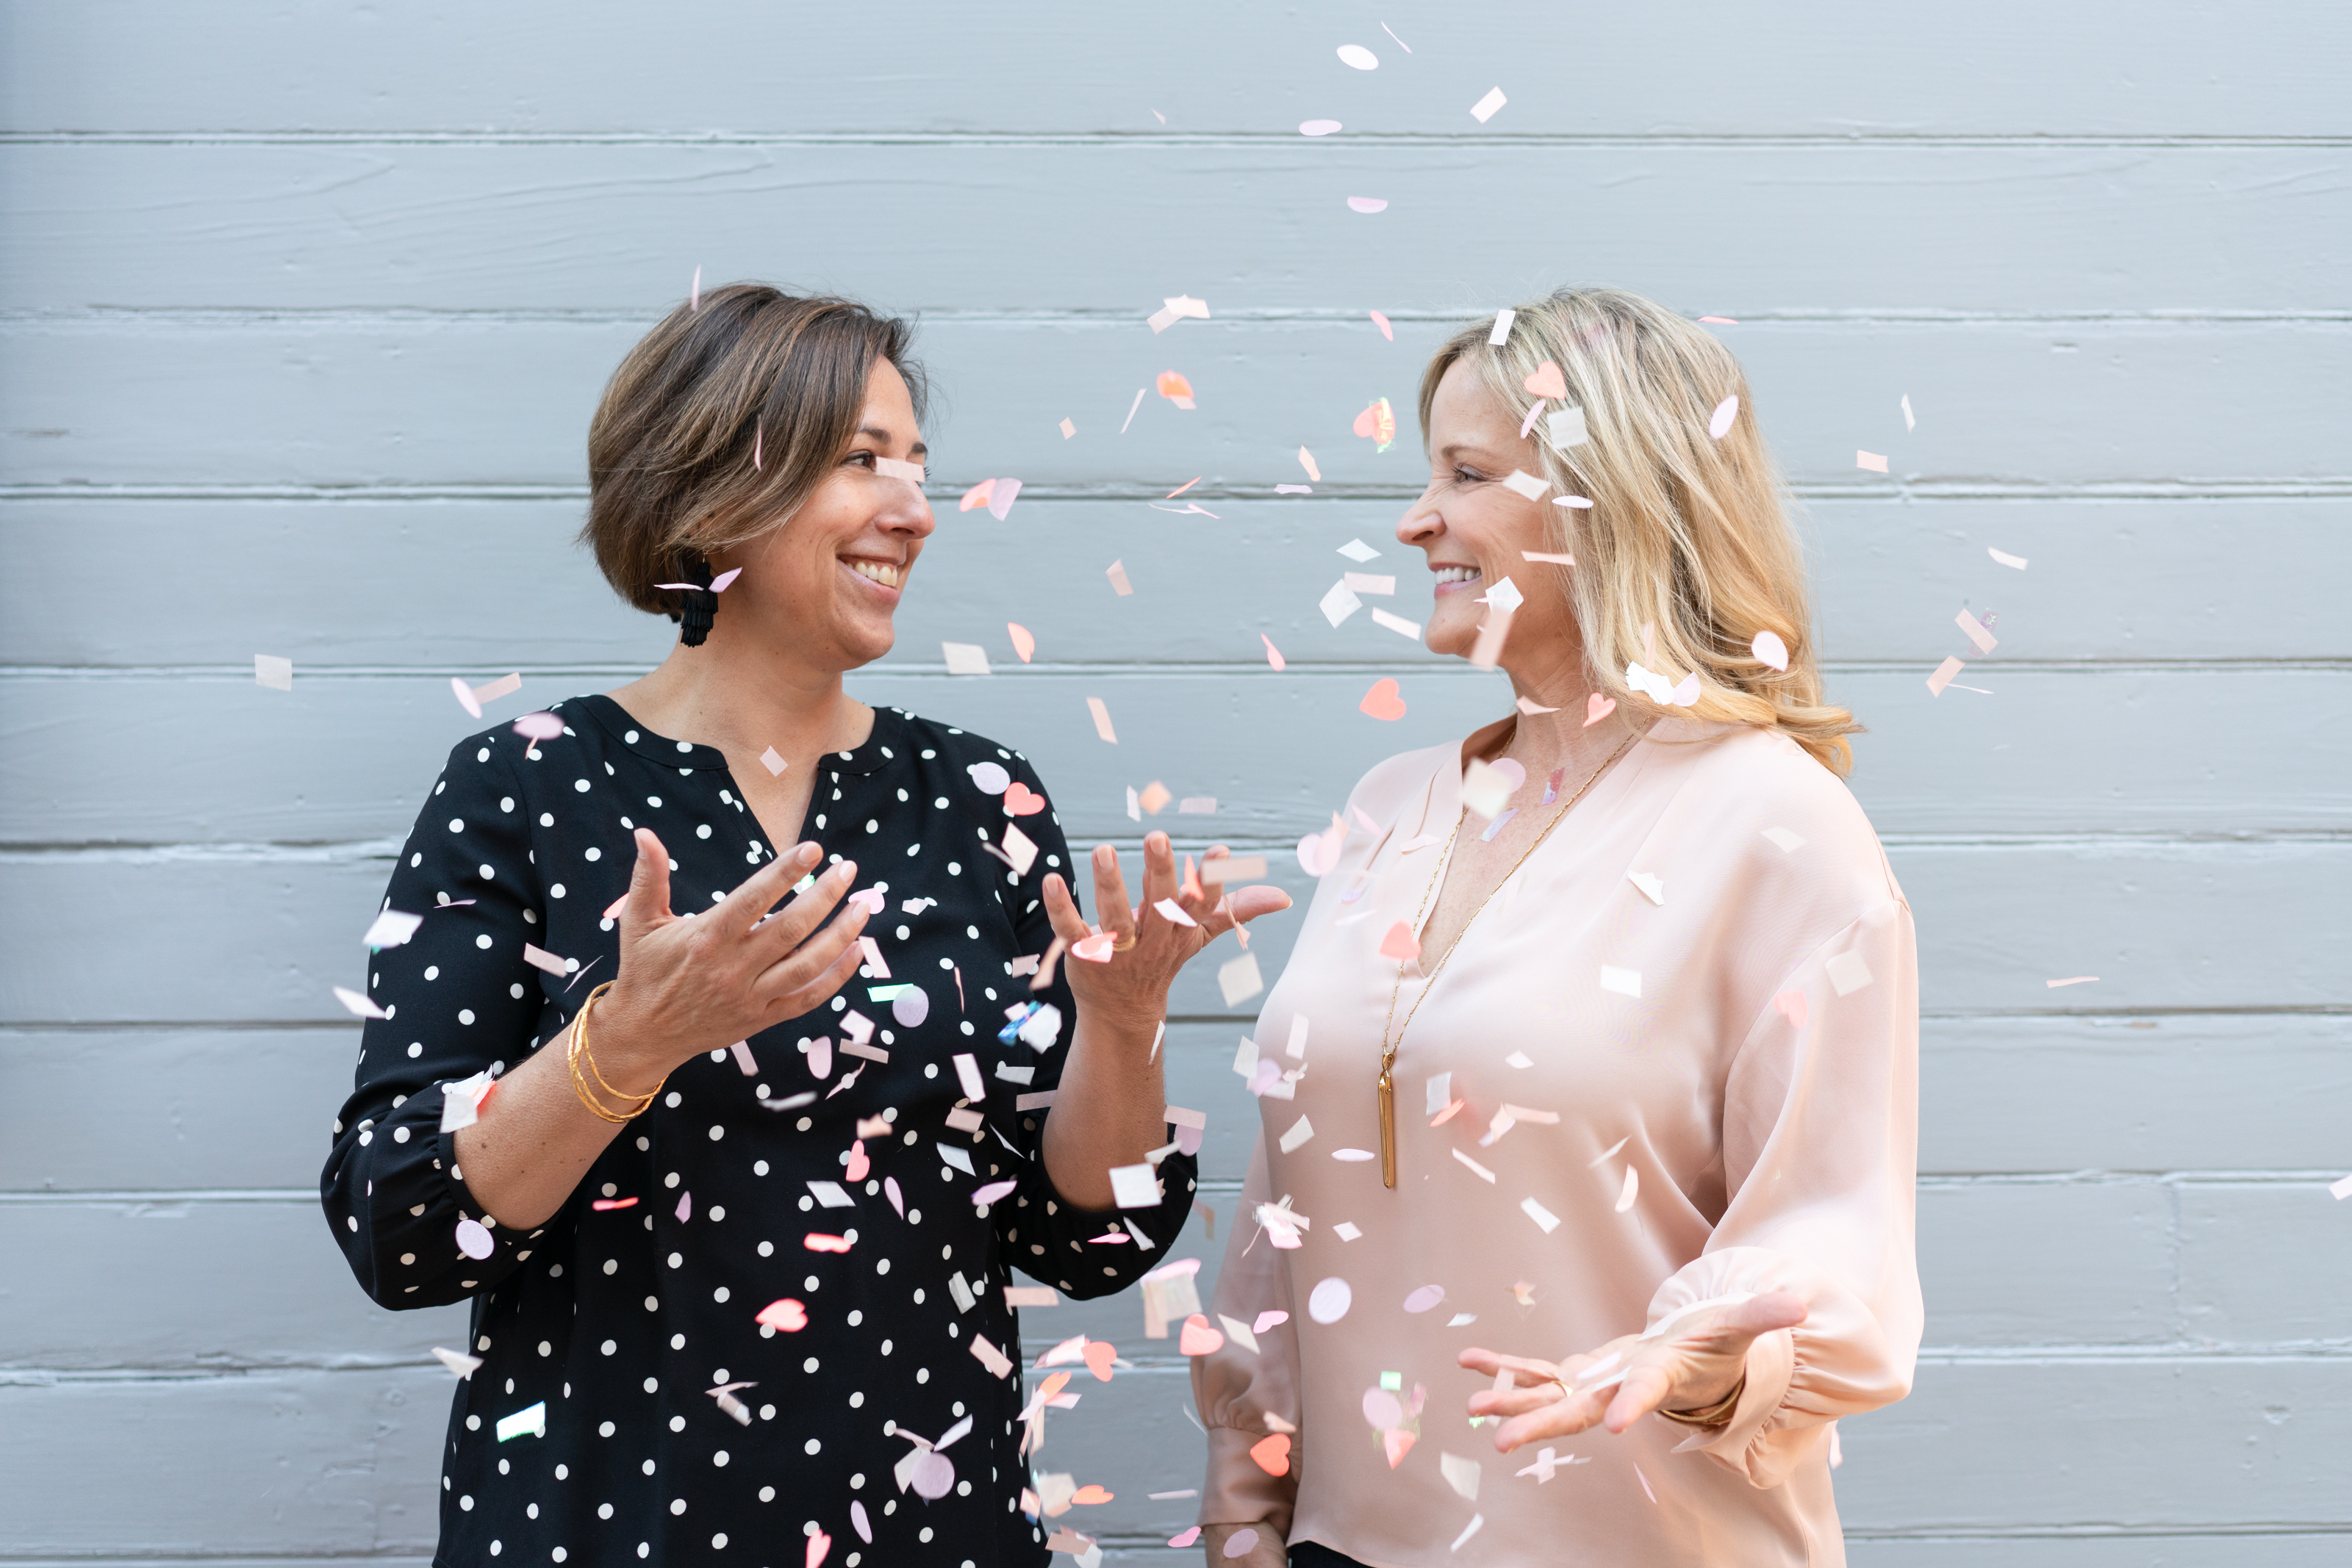 Two women throwing confetti and smiling at each other